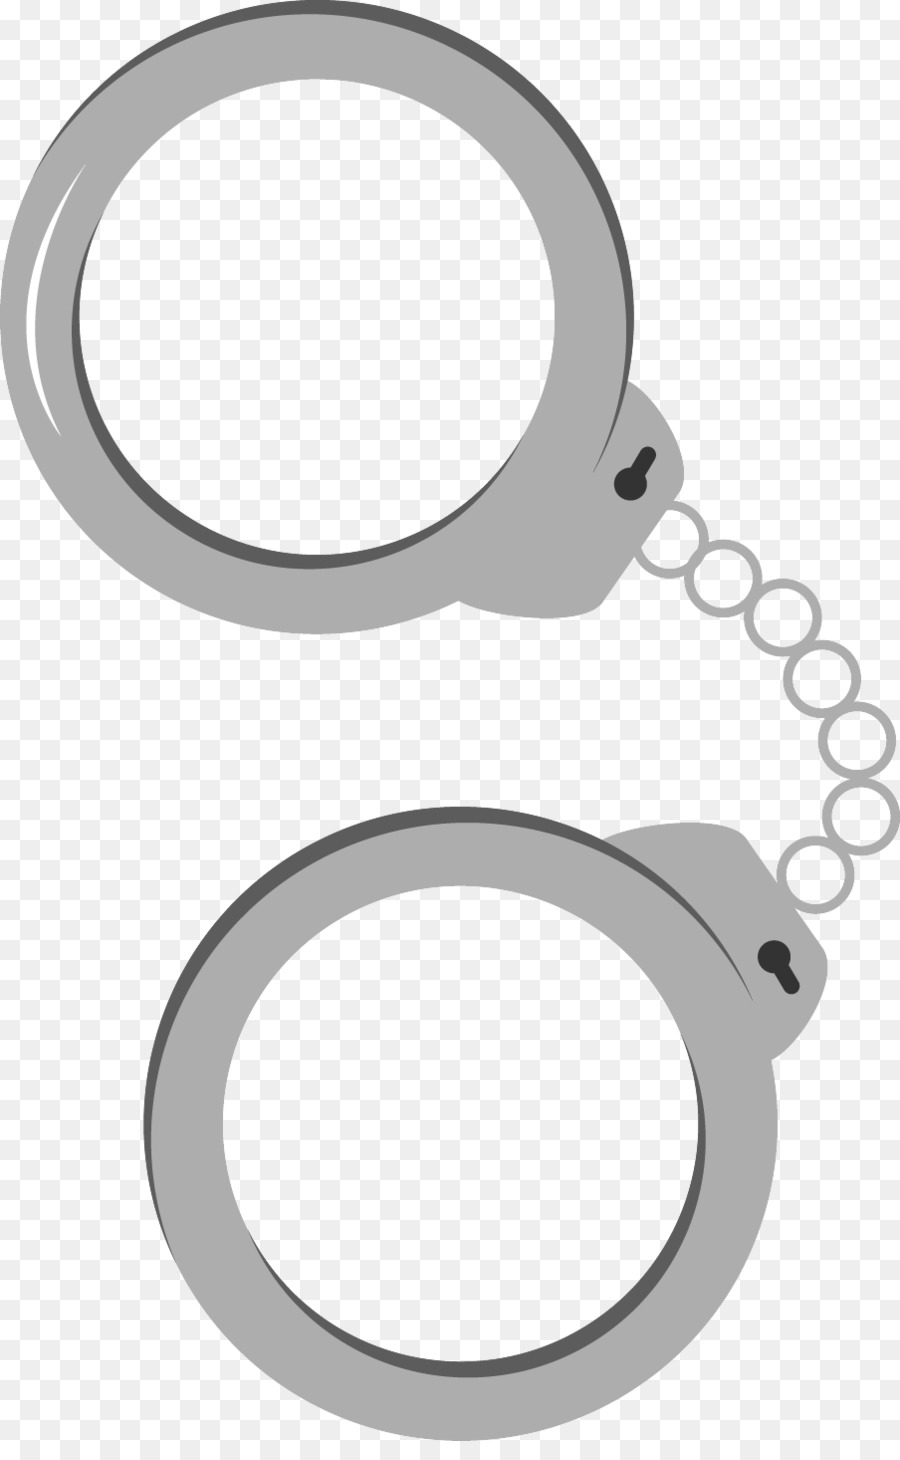 Police Firefighter Handcuffs Clip art - Police png download - 904*1447 - Free Transparent Police png Download.